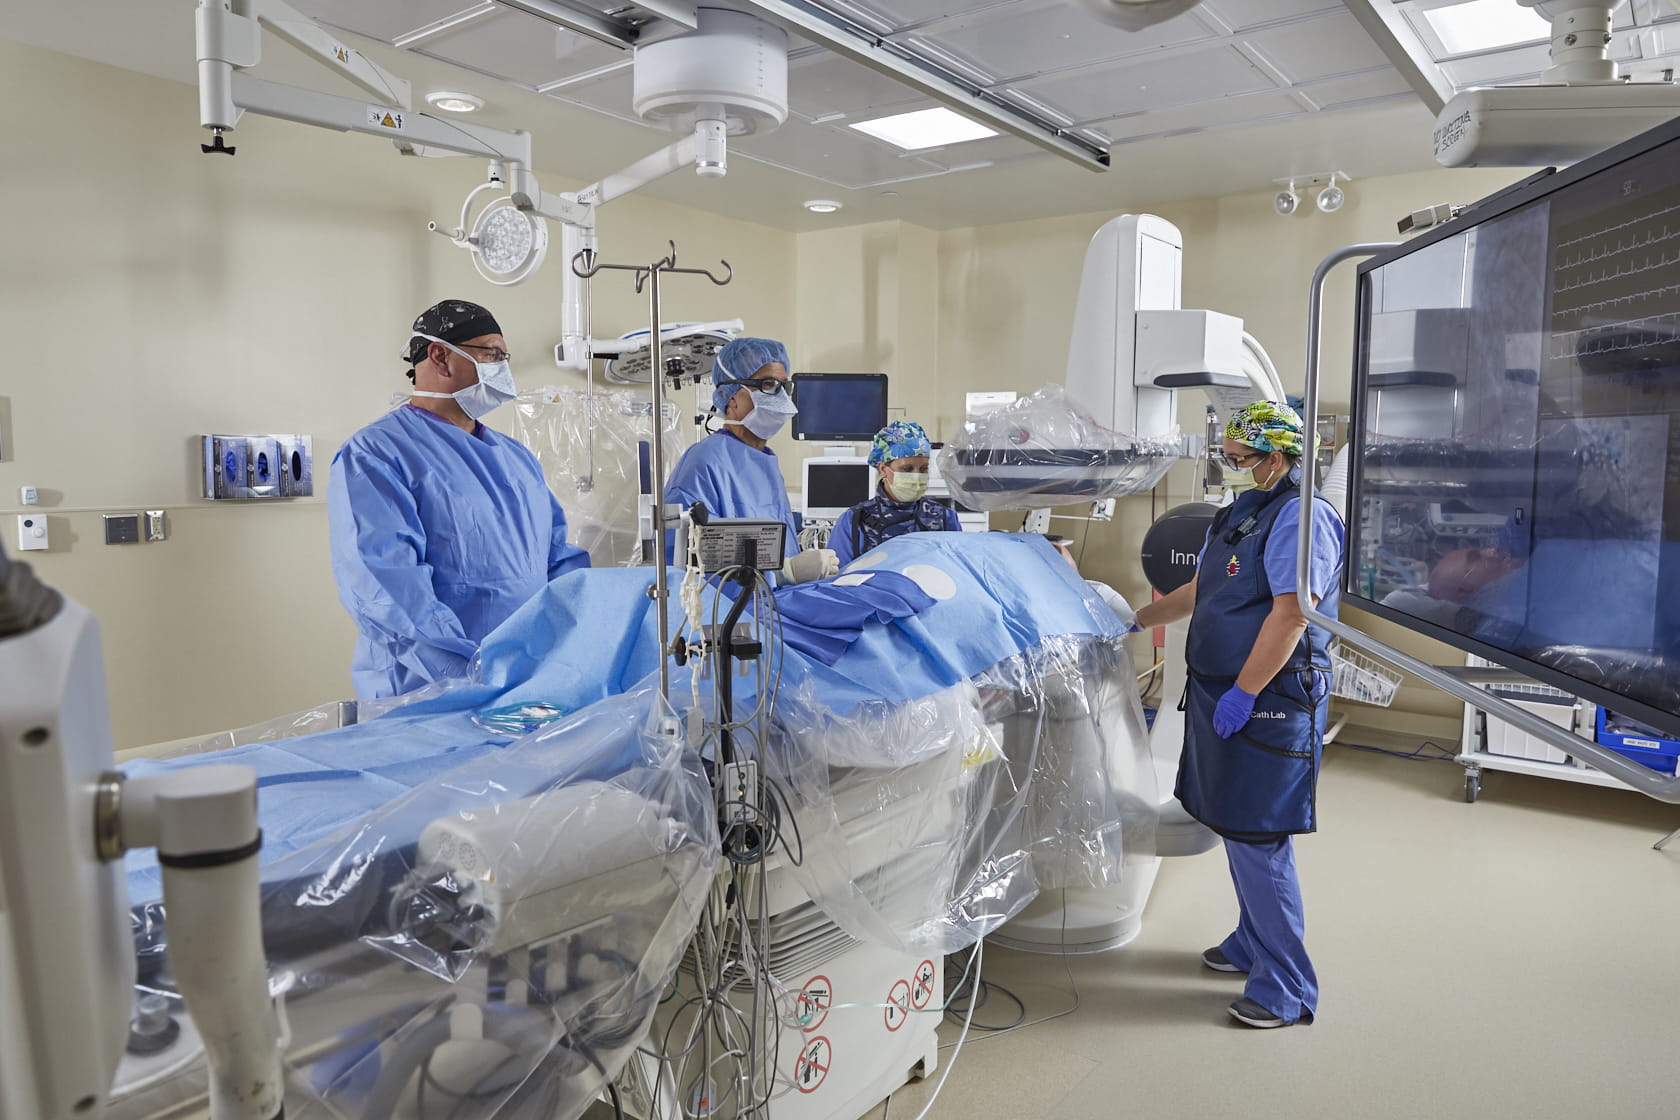 Image of a catheterization lab with 4 medical professionals providing treatment. 